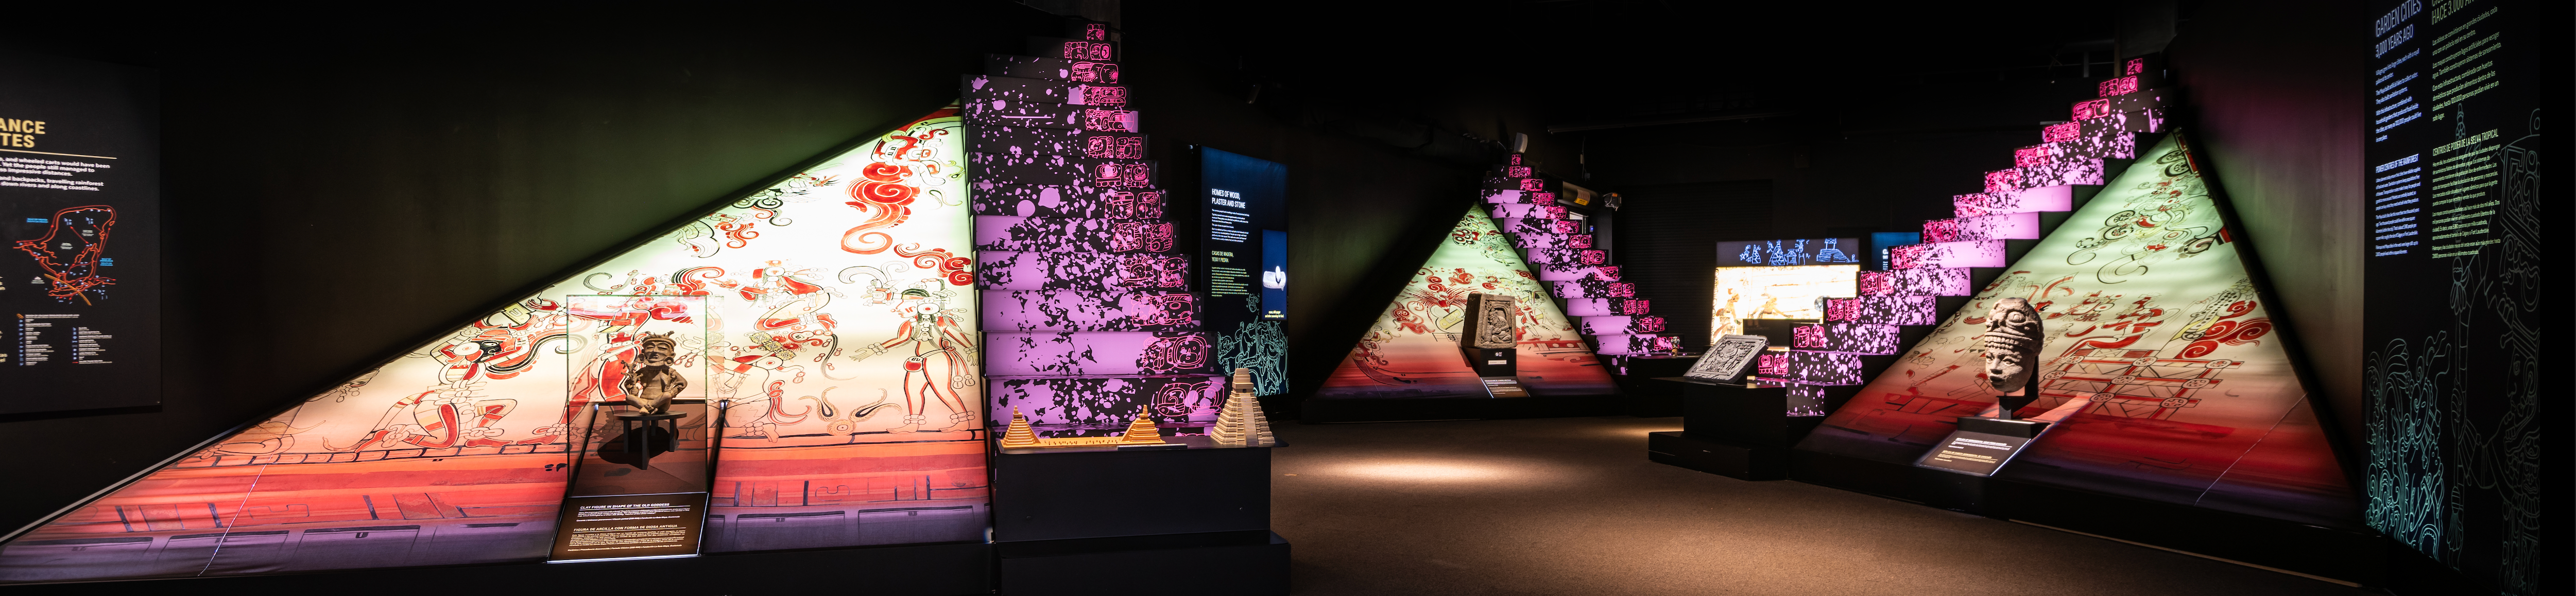 Colorful pyramid-shaped displays inside the exhibition Maya: The Exhibition